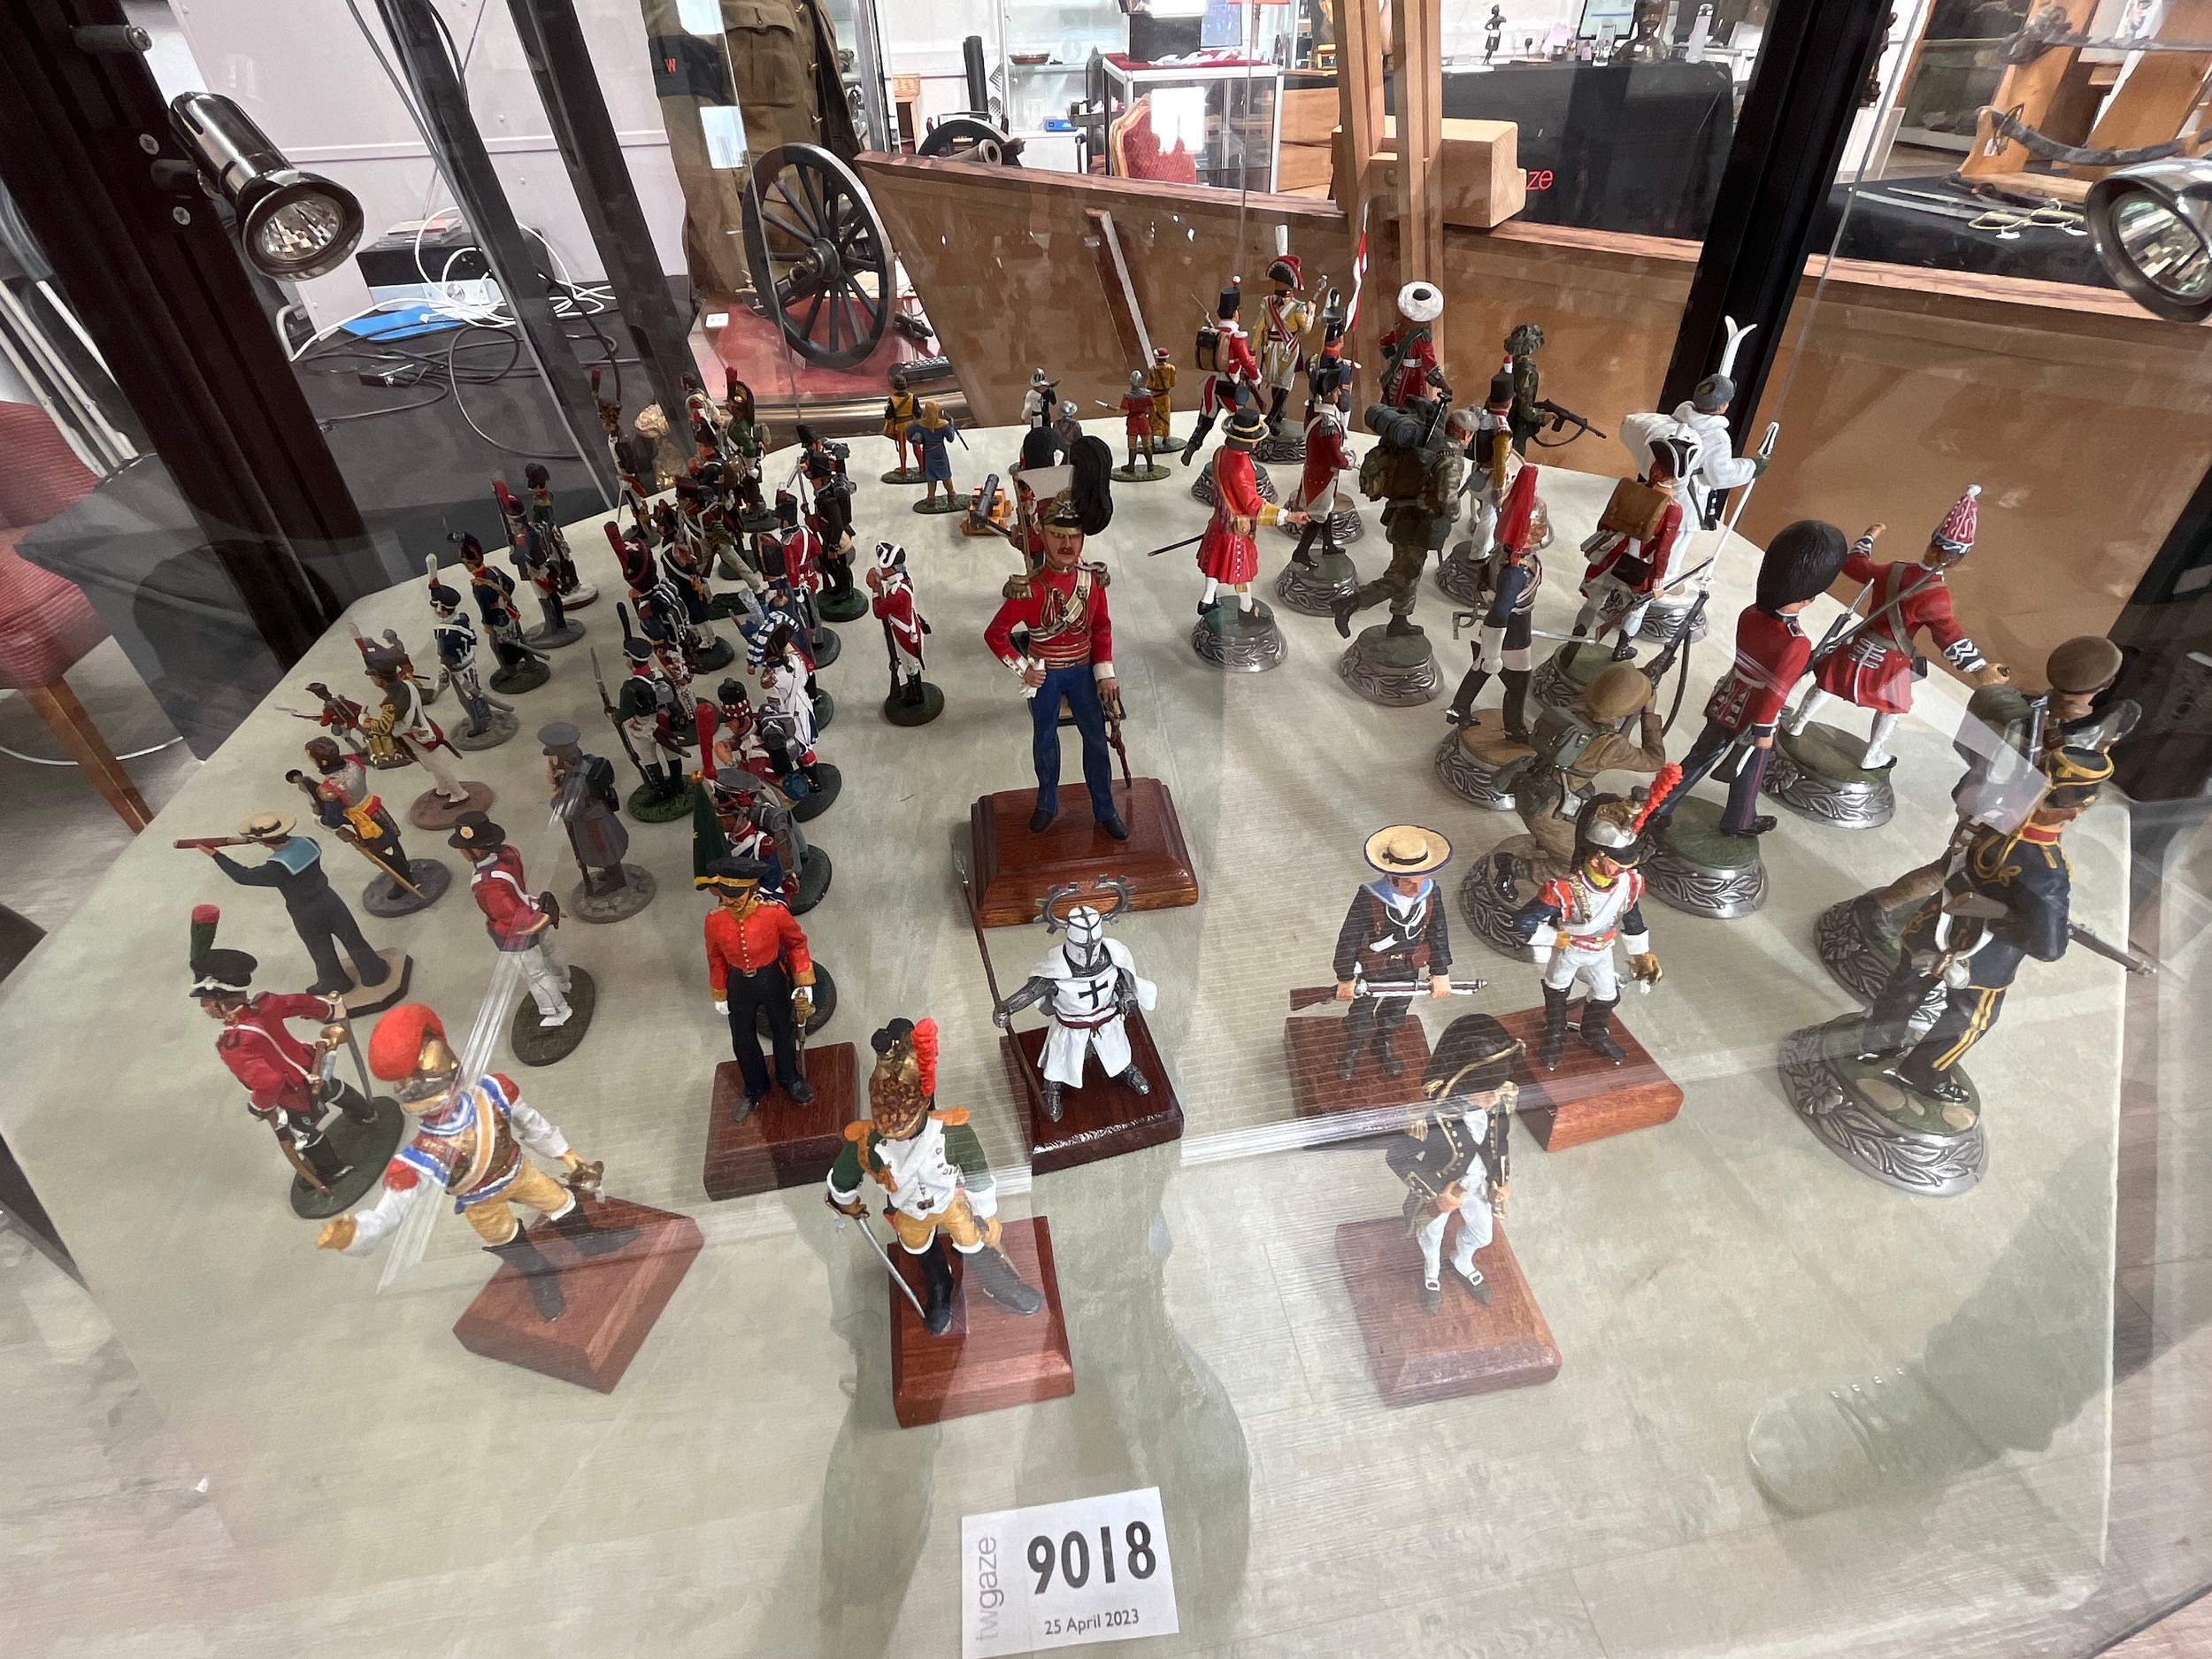 A collection of Delprado military figures together with others